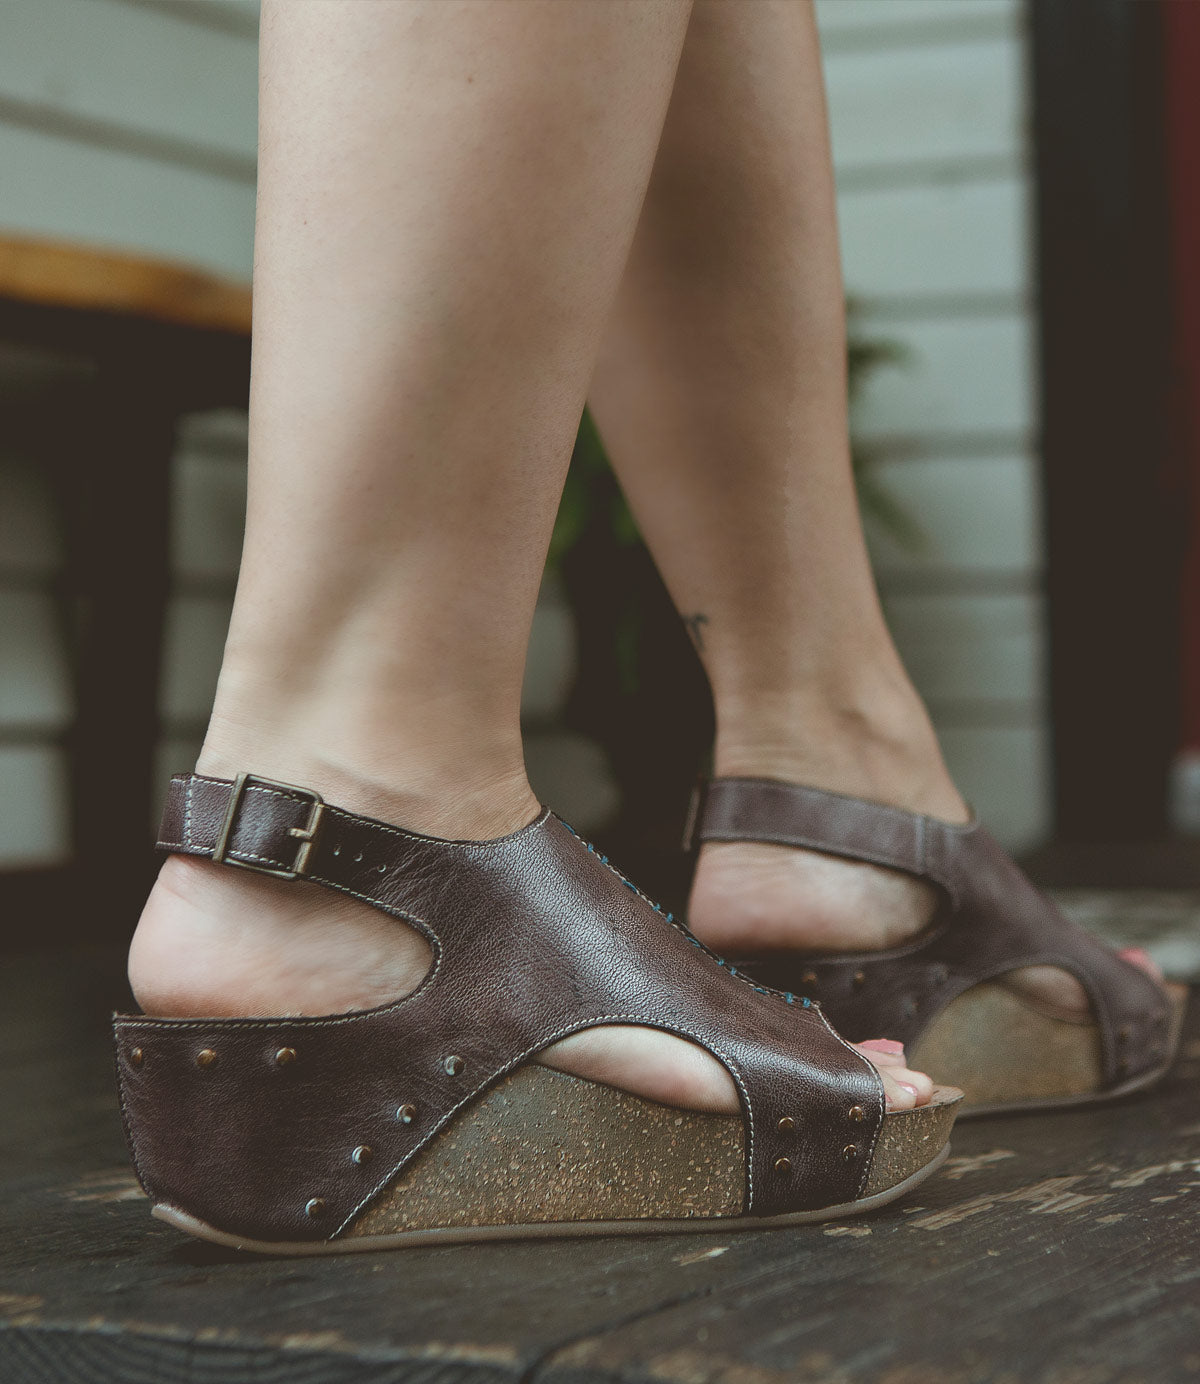 
                  
                    Close-up of a person's feet wearing Roan Fortnight brown full-grain leather wedge sandals with buckle straps and exposed toes. The person is standing on a dark wooden floor, showcasing the adjustable ankle strap for a secure fit.
                  
                